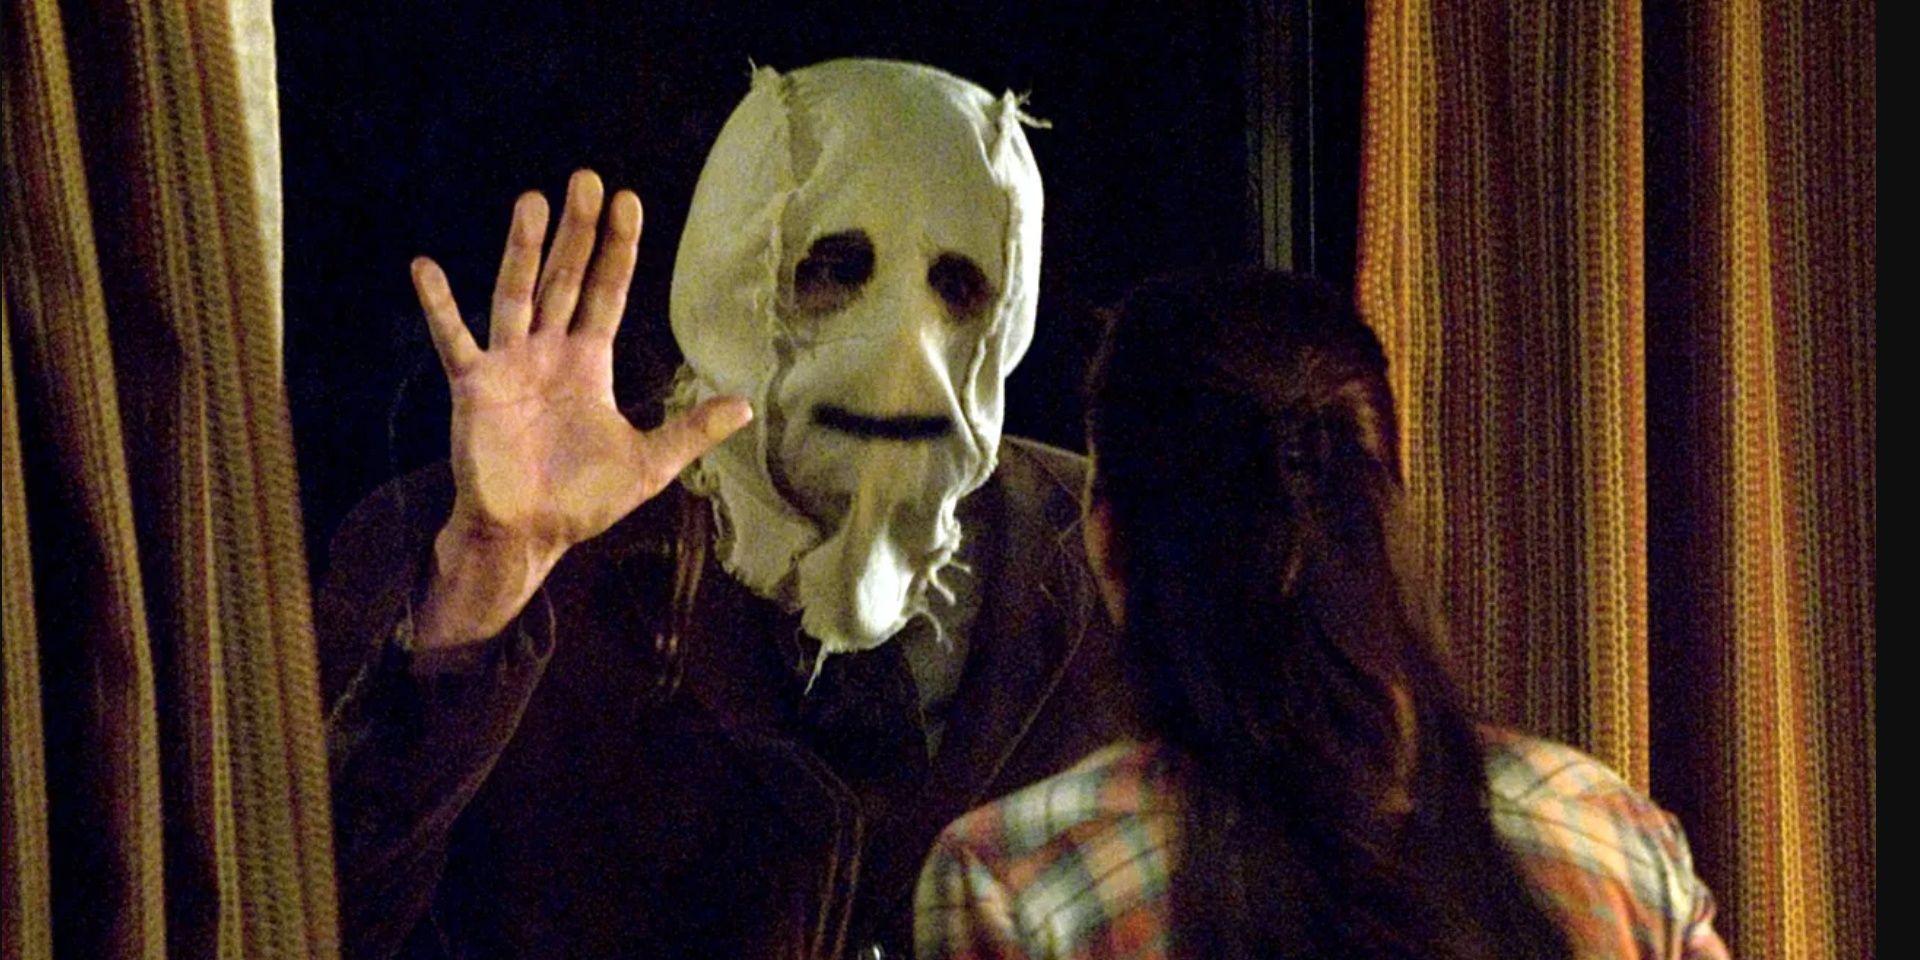 The Intruder From The Strangers